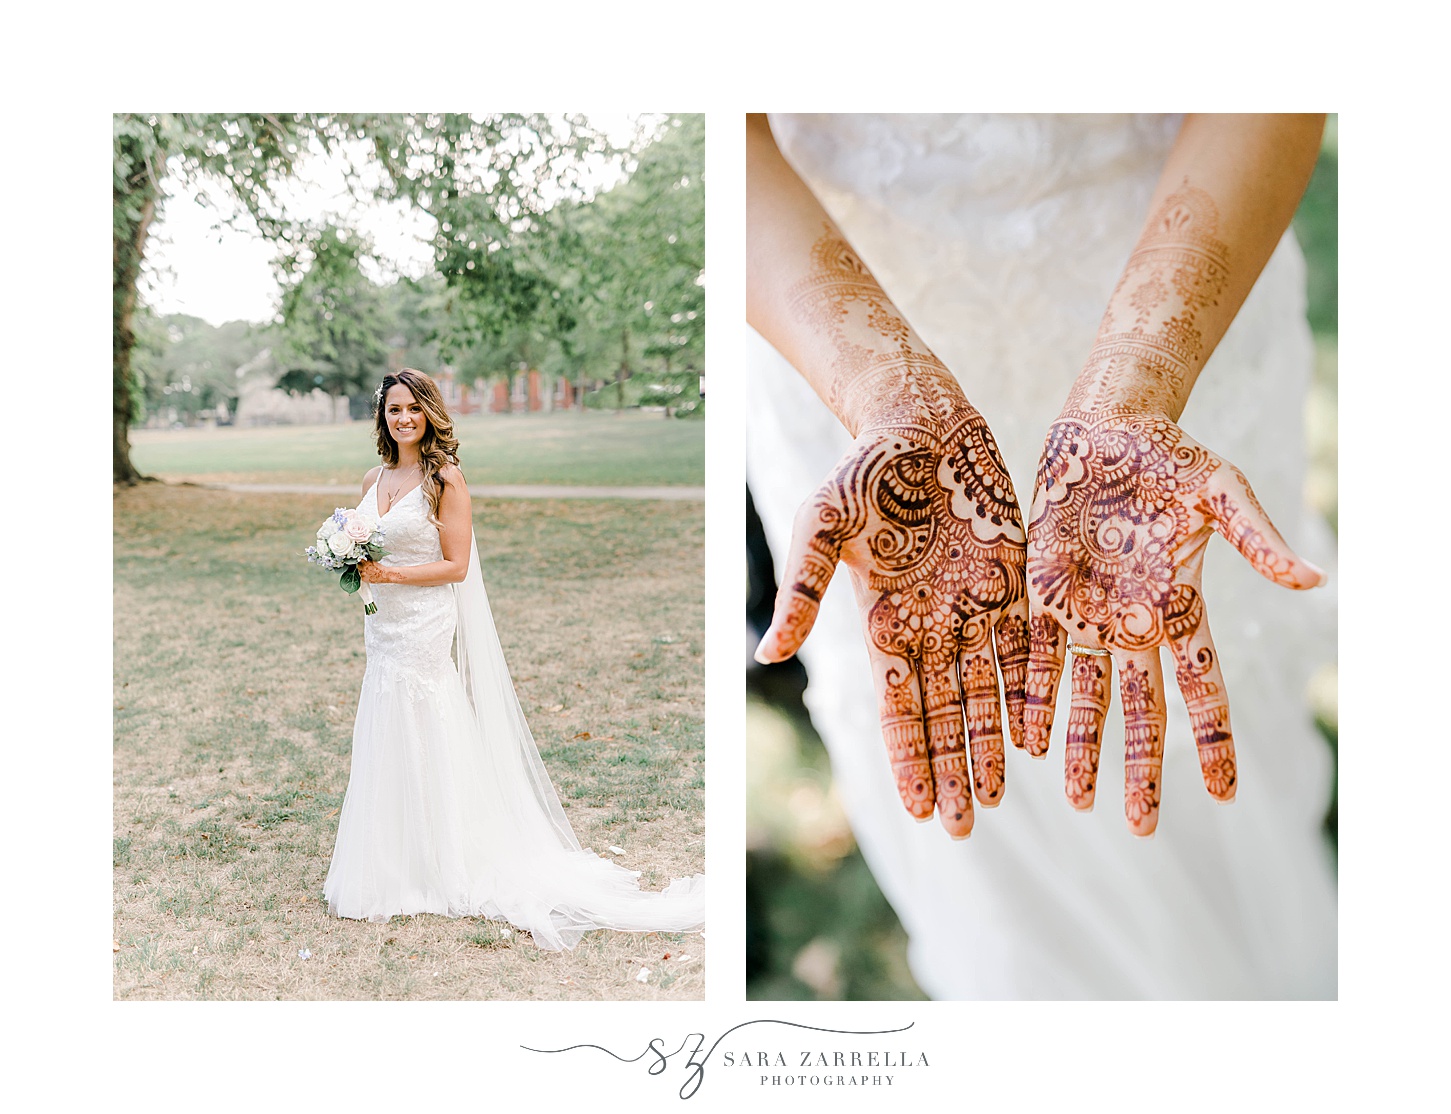 bride poses in traditional wedding gown with henna on hands